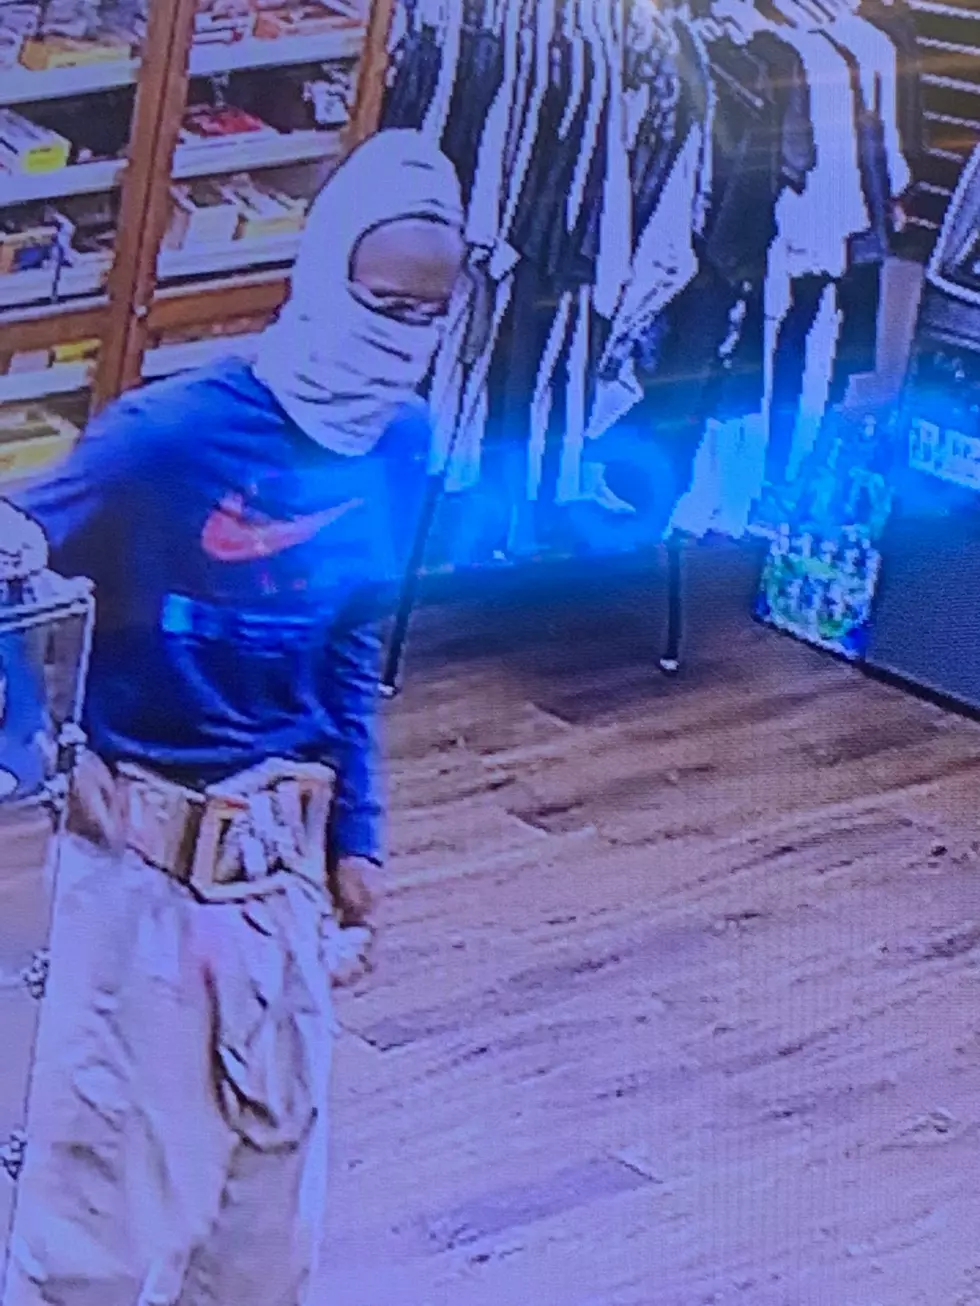 Texas Man Robs Store While Wearing WWE Belt